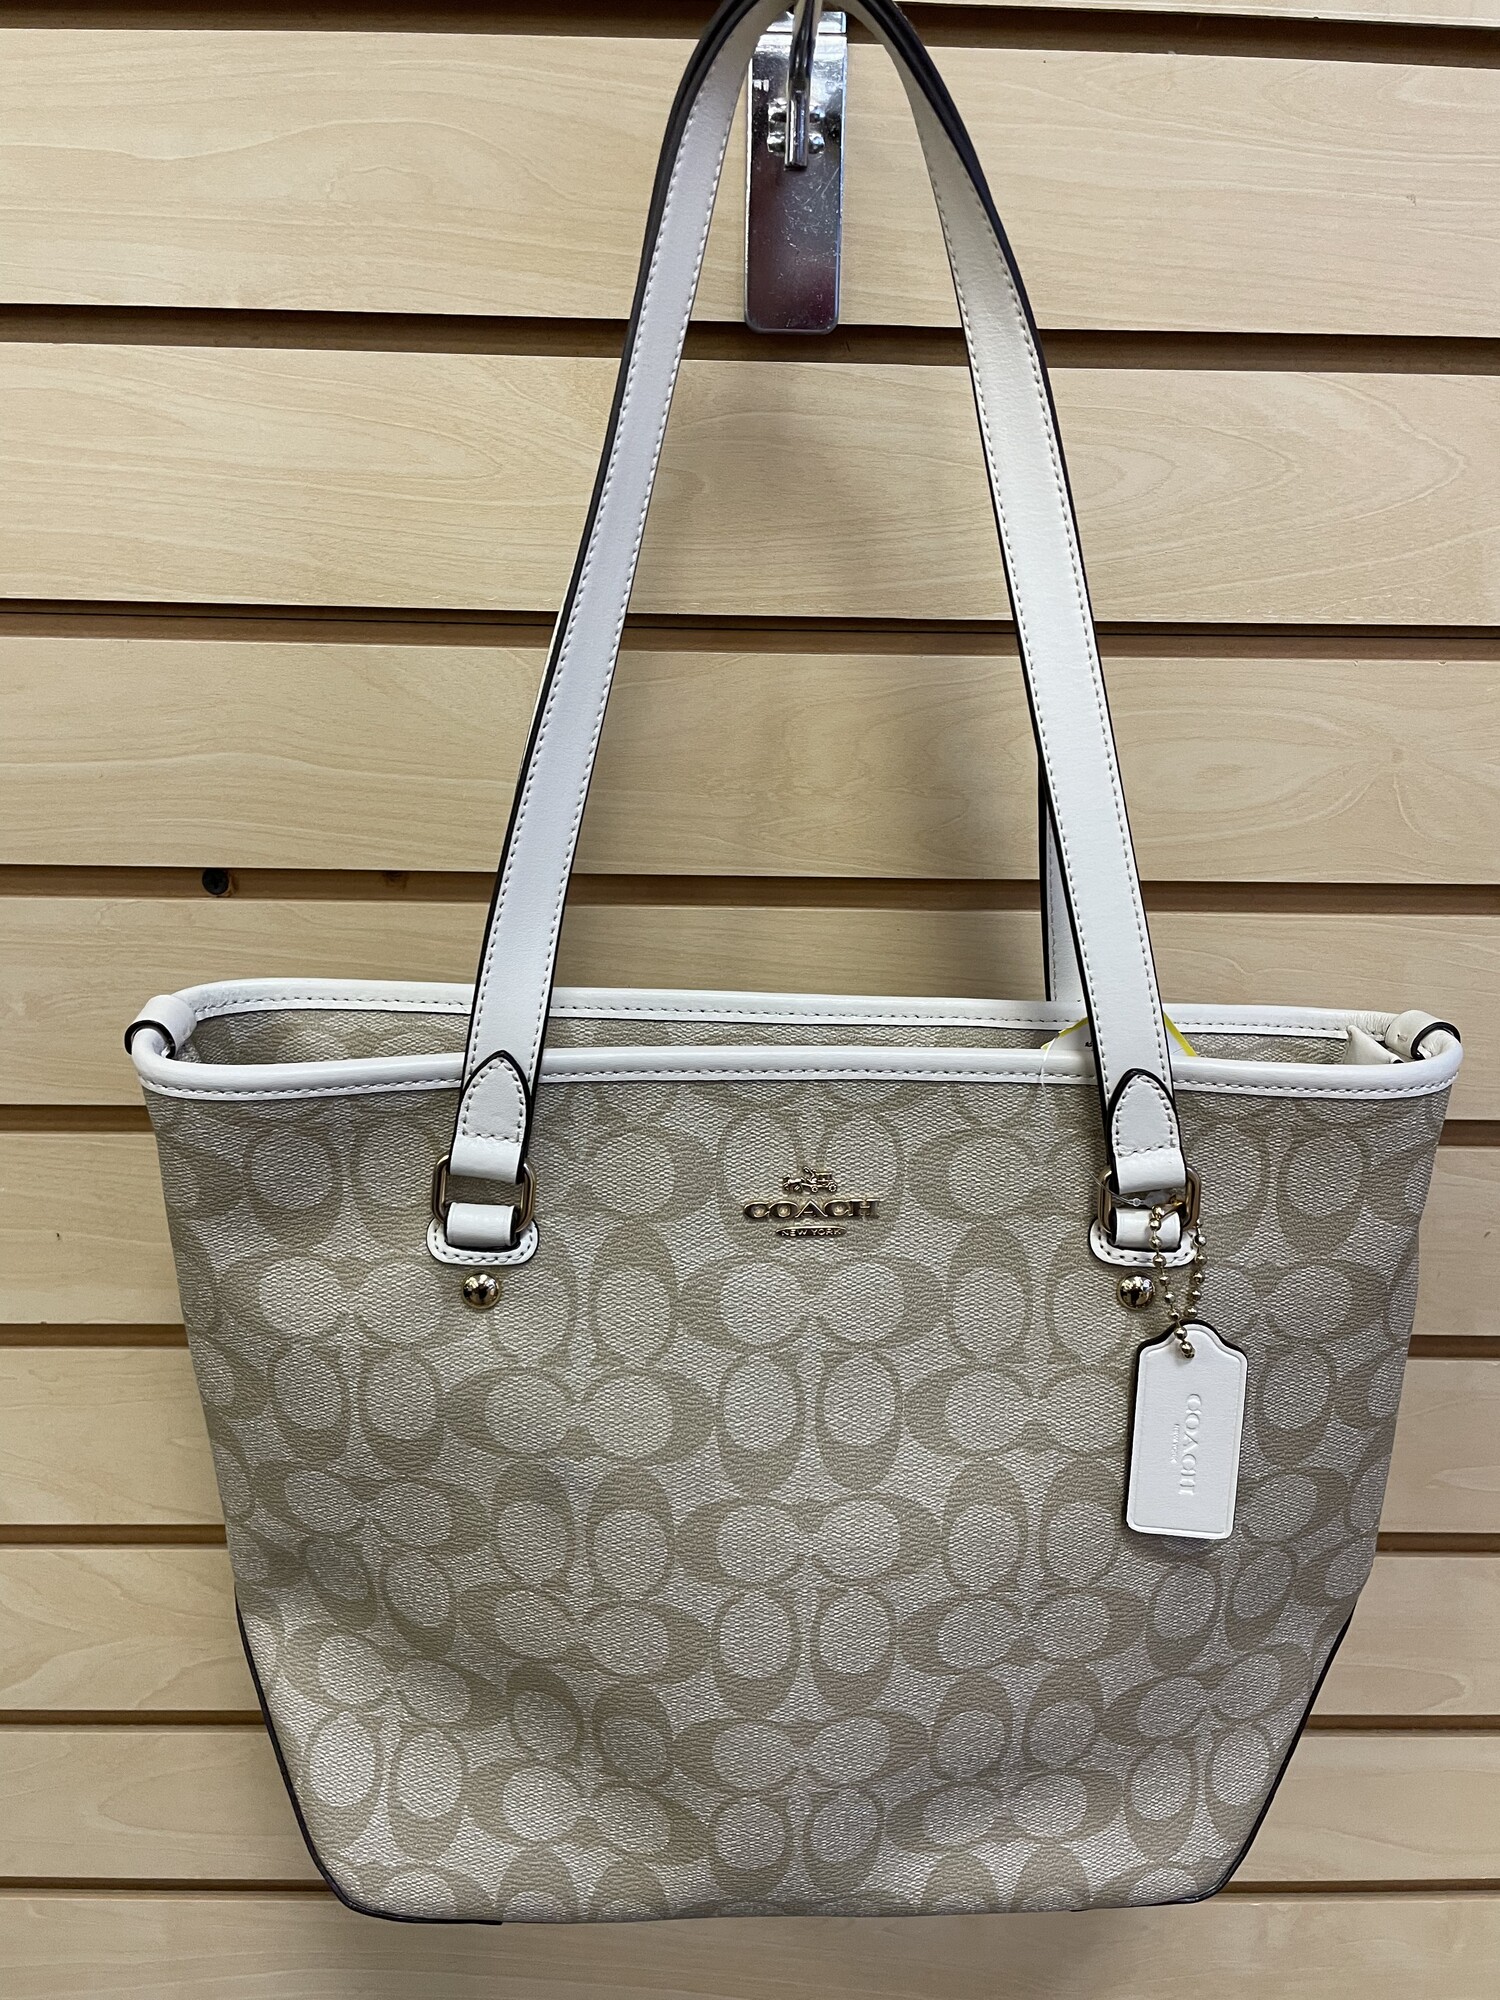 Coach Purse, Khaki with Cream Accents and Coach (C) Design, Brown Lining, Gold Hardware, Coach Logo on Front and Zipper in Back, 1 Zippered Pocket and 1 Split Pocket, Size: 10 x 4 x 13 inches